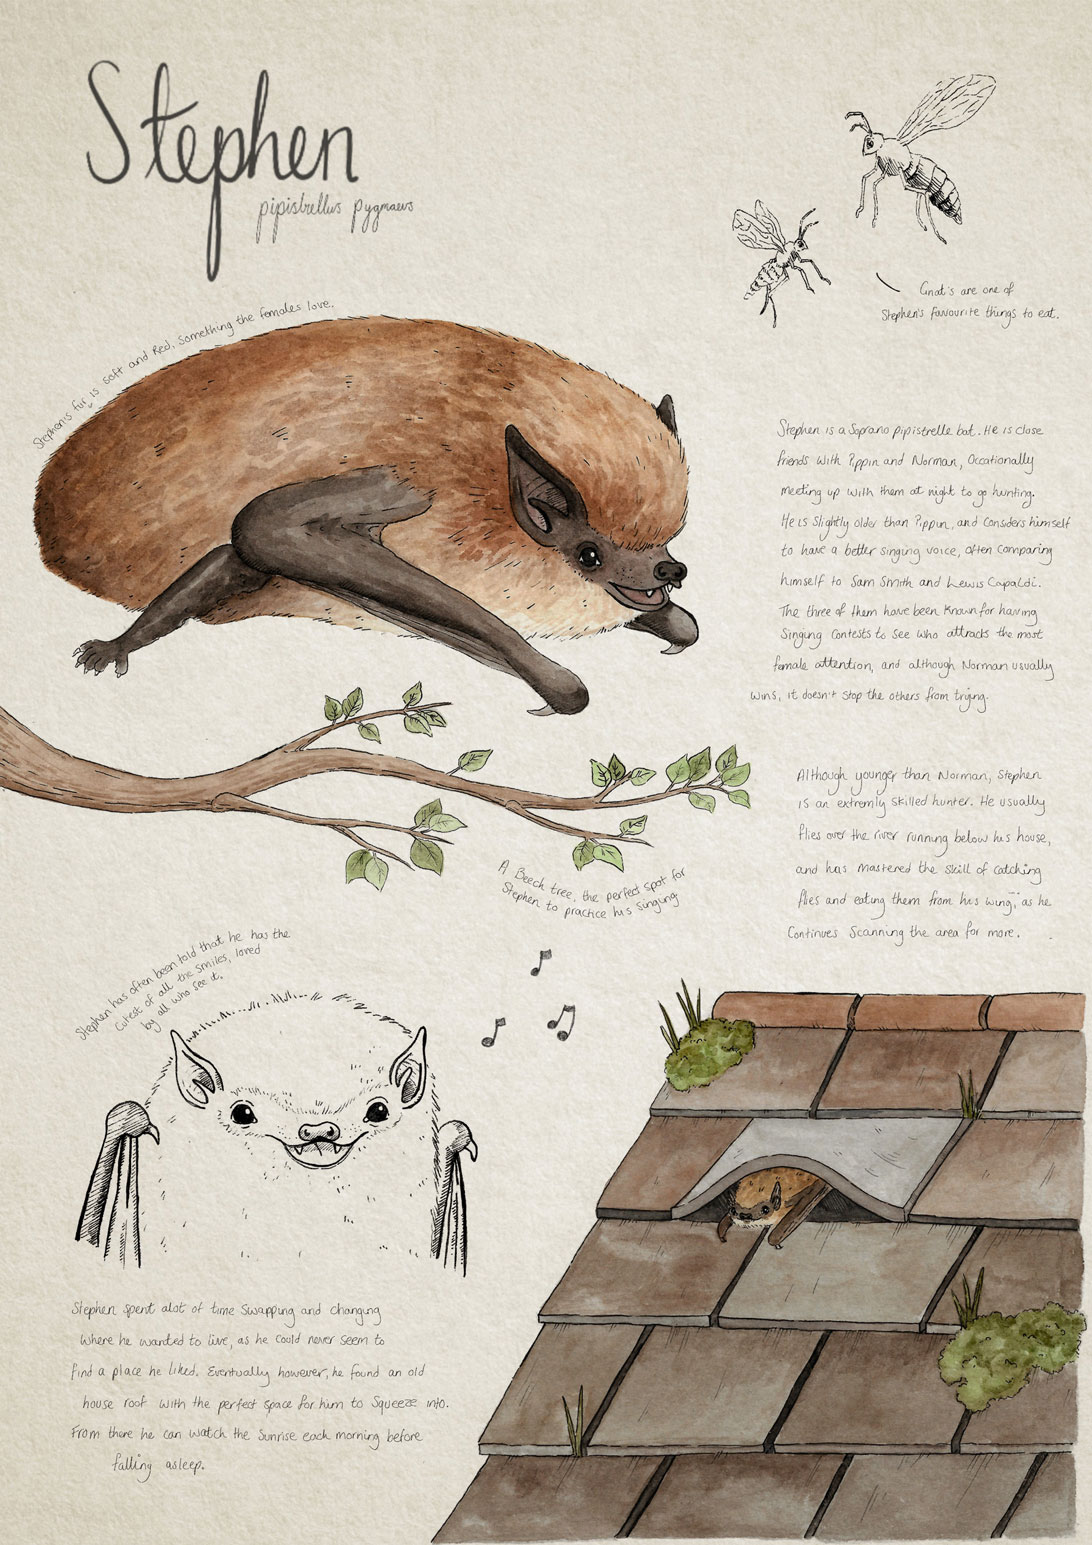 illustration and handwritten text information about the Stephen bat